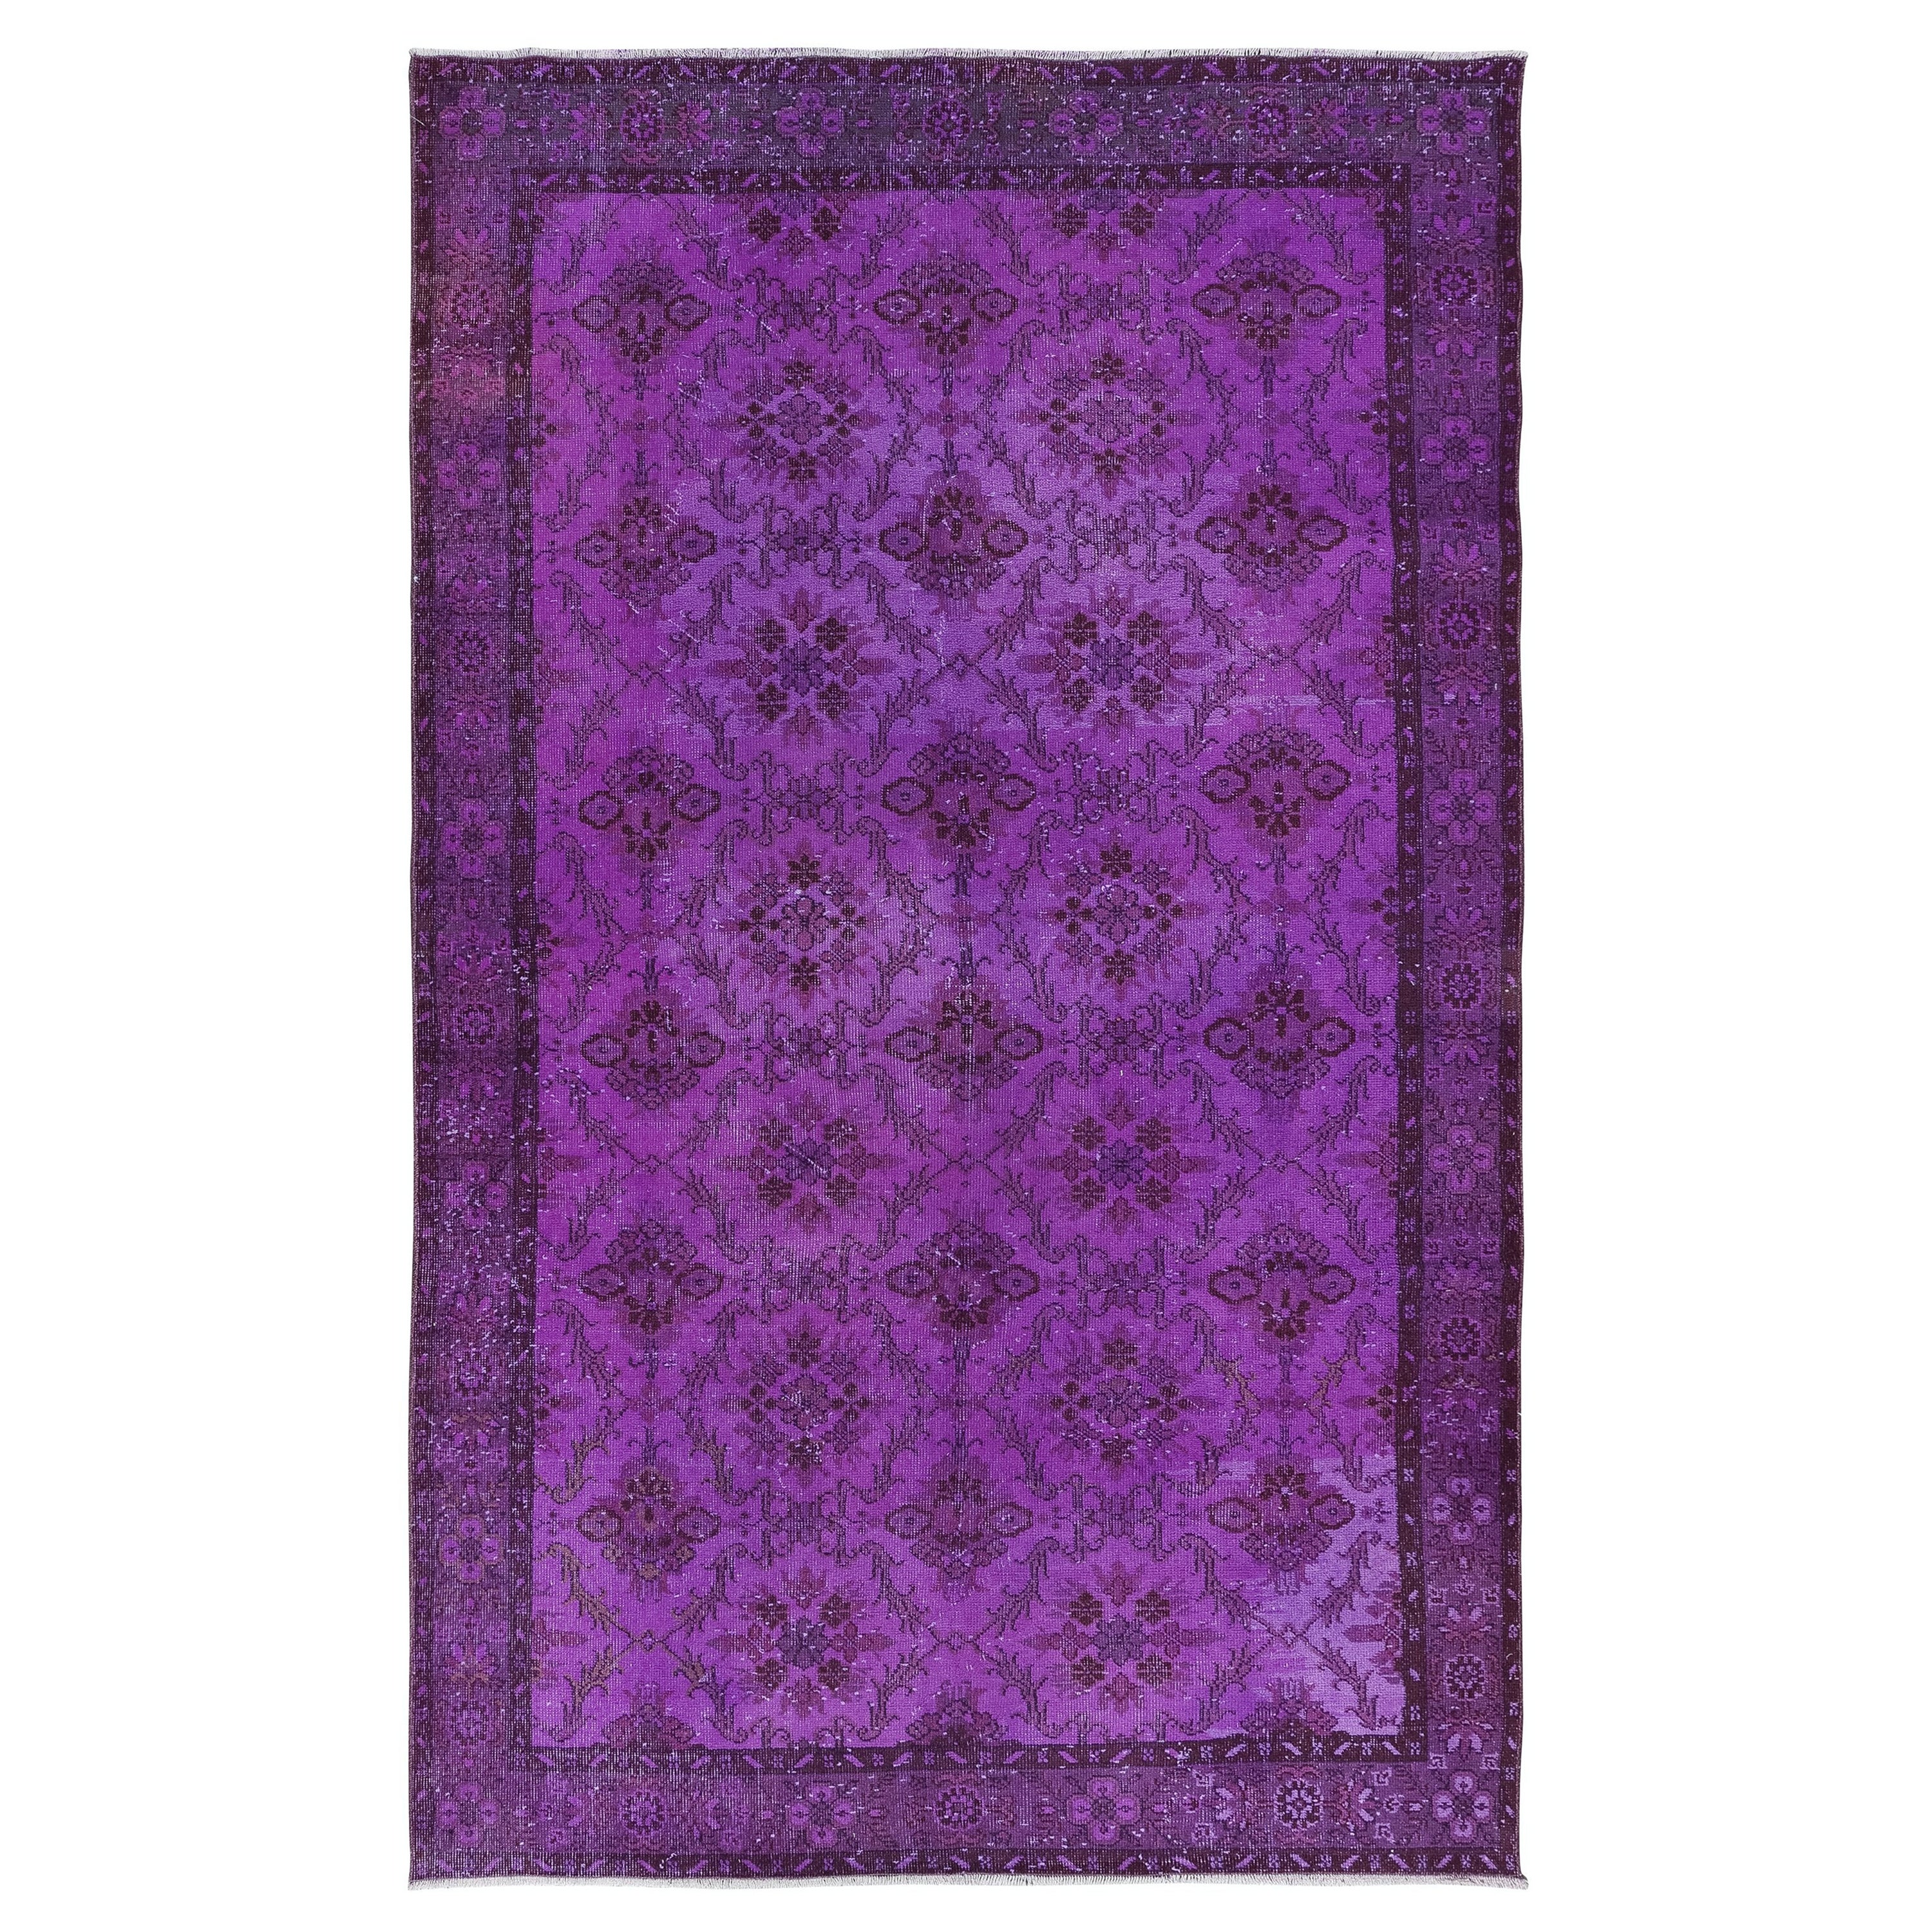 6.2x10 Ft Purple Contemporary Area Rug with Floral Design, Handknotted in Turkey For Sale